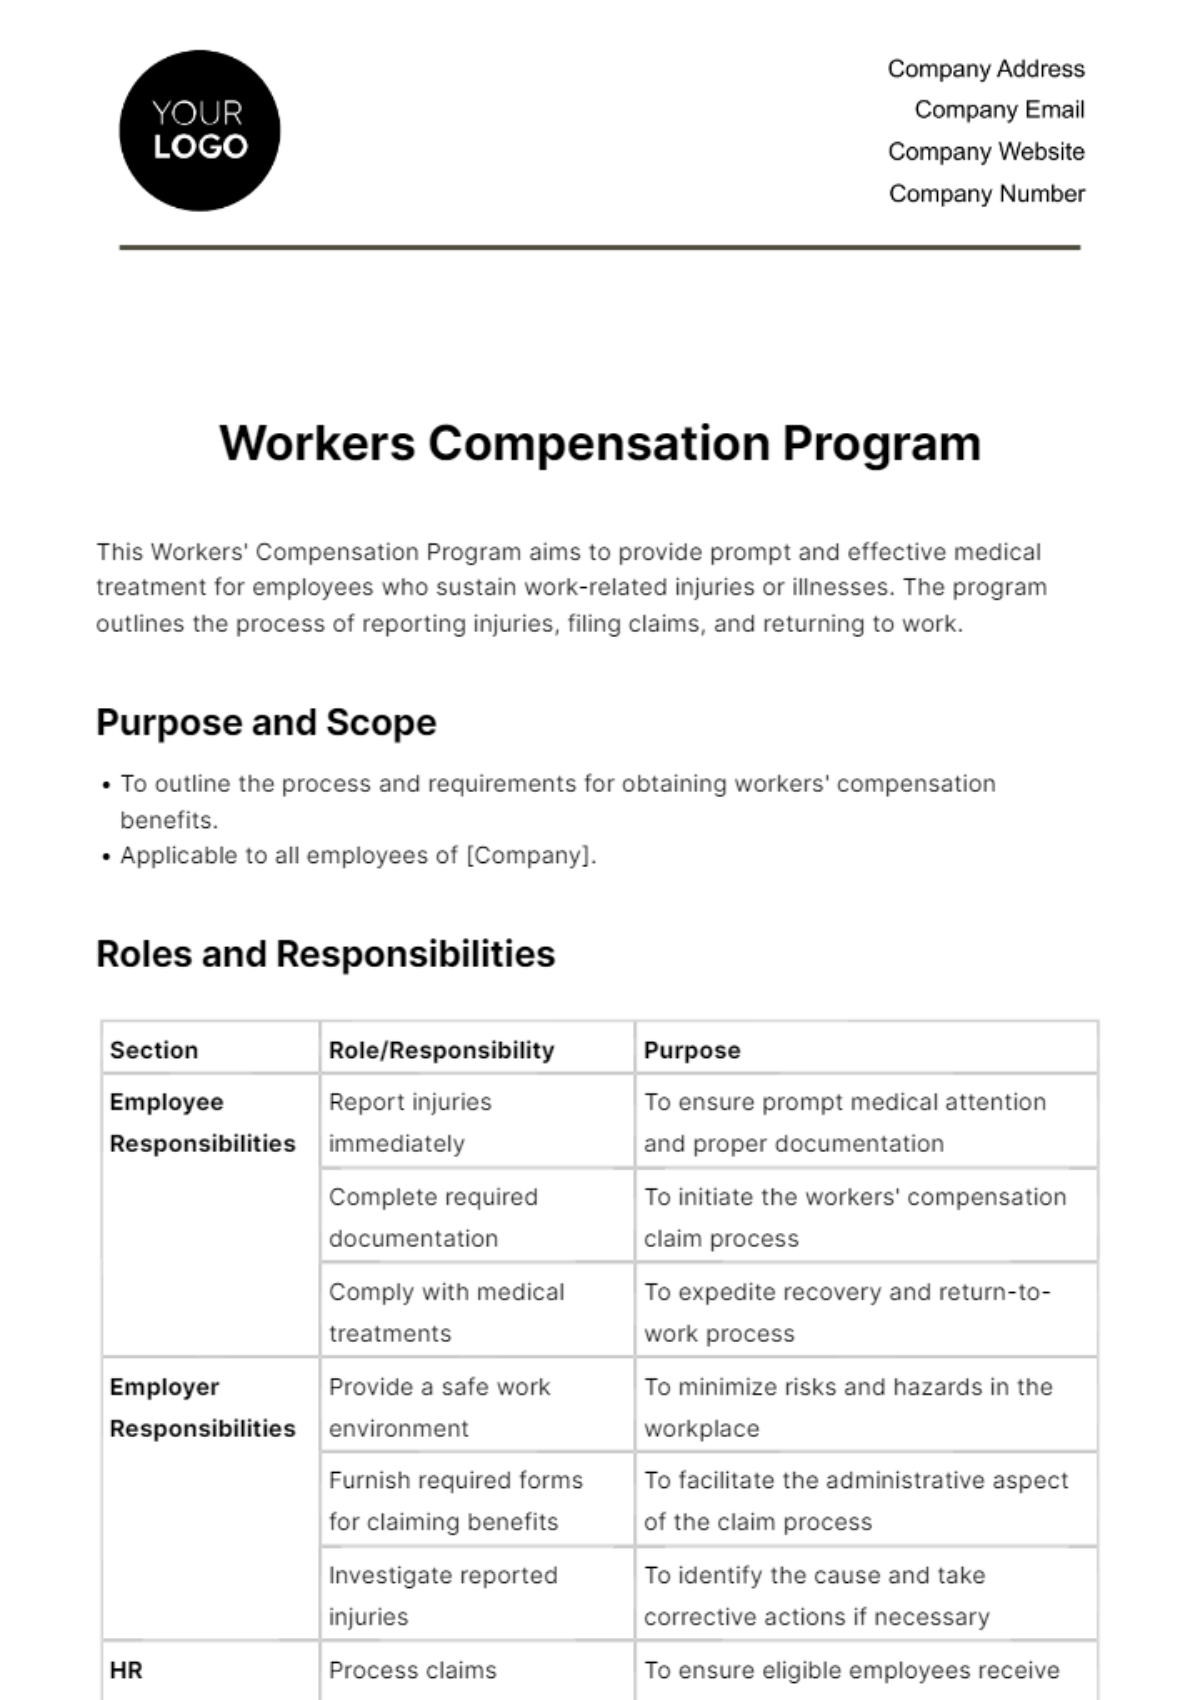 Free Workers Compensation Program HR Template